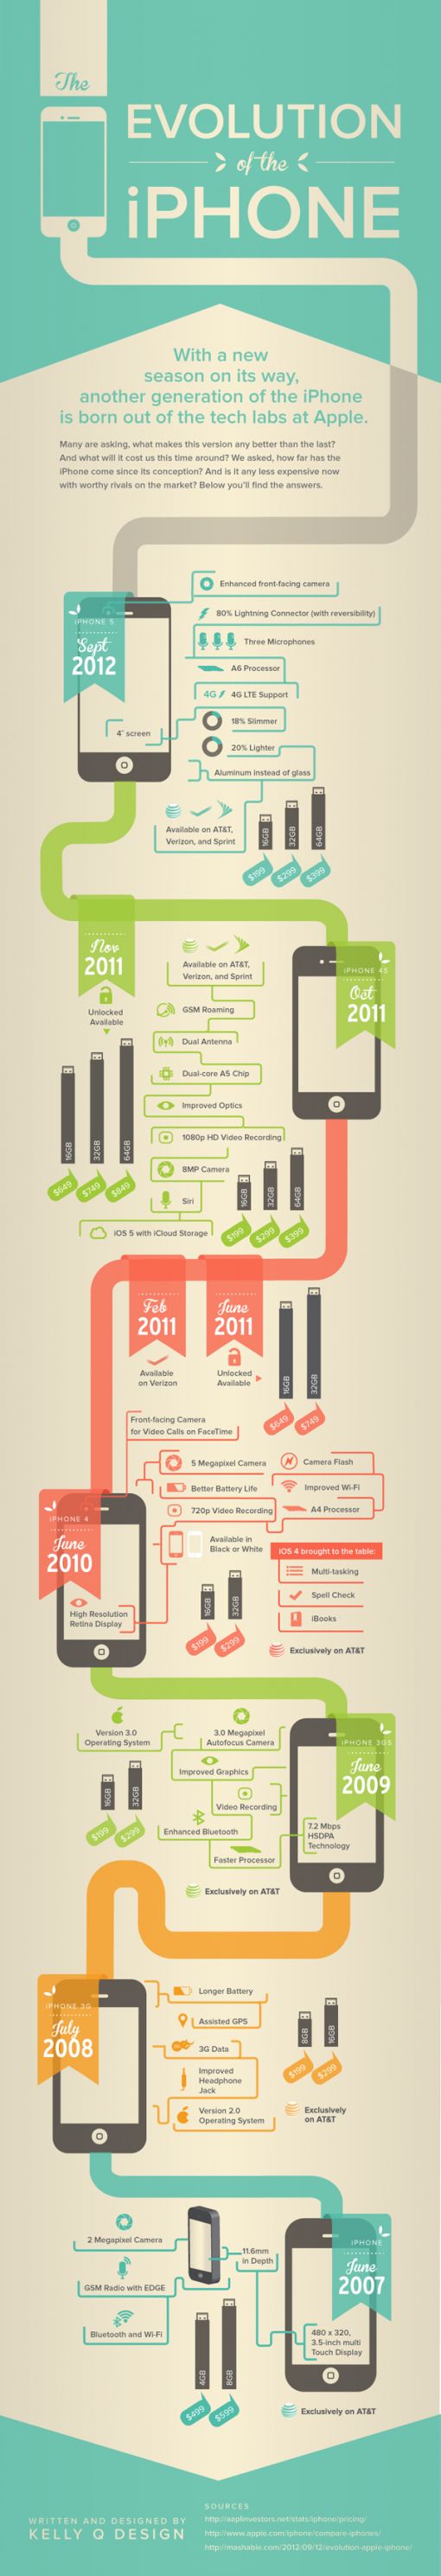 evolution-of-the-iPhone-infographic